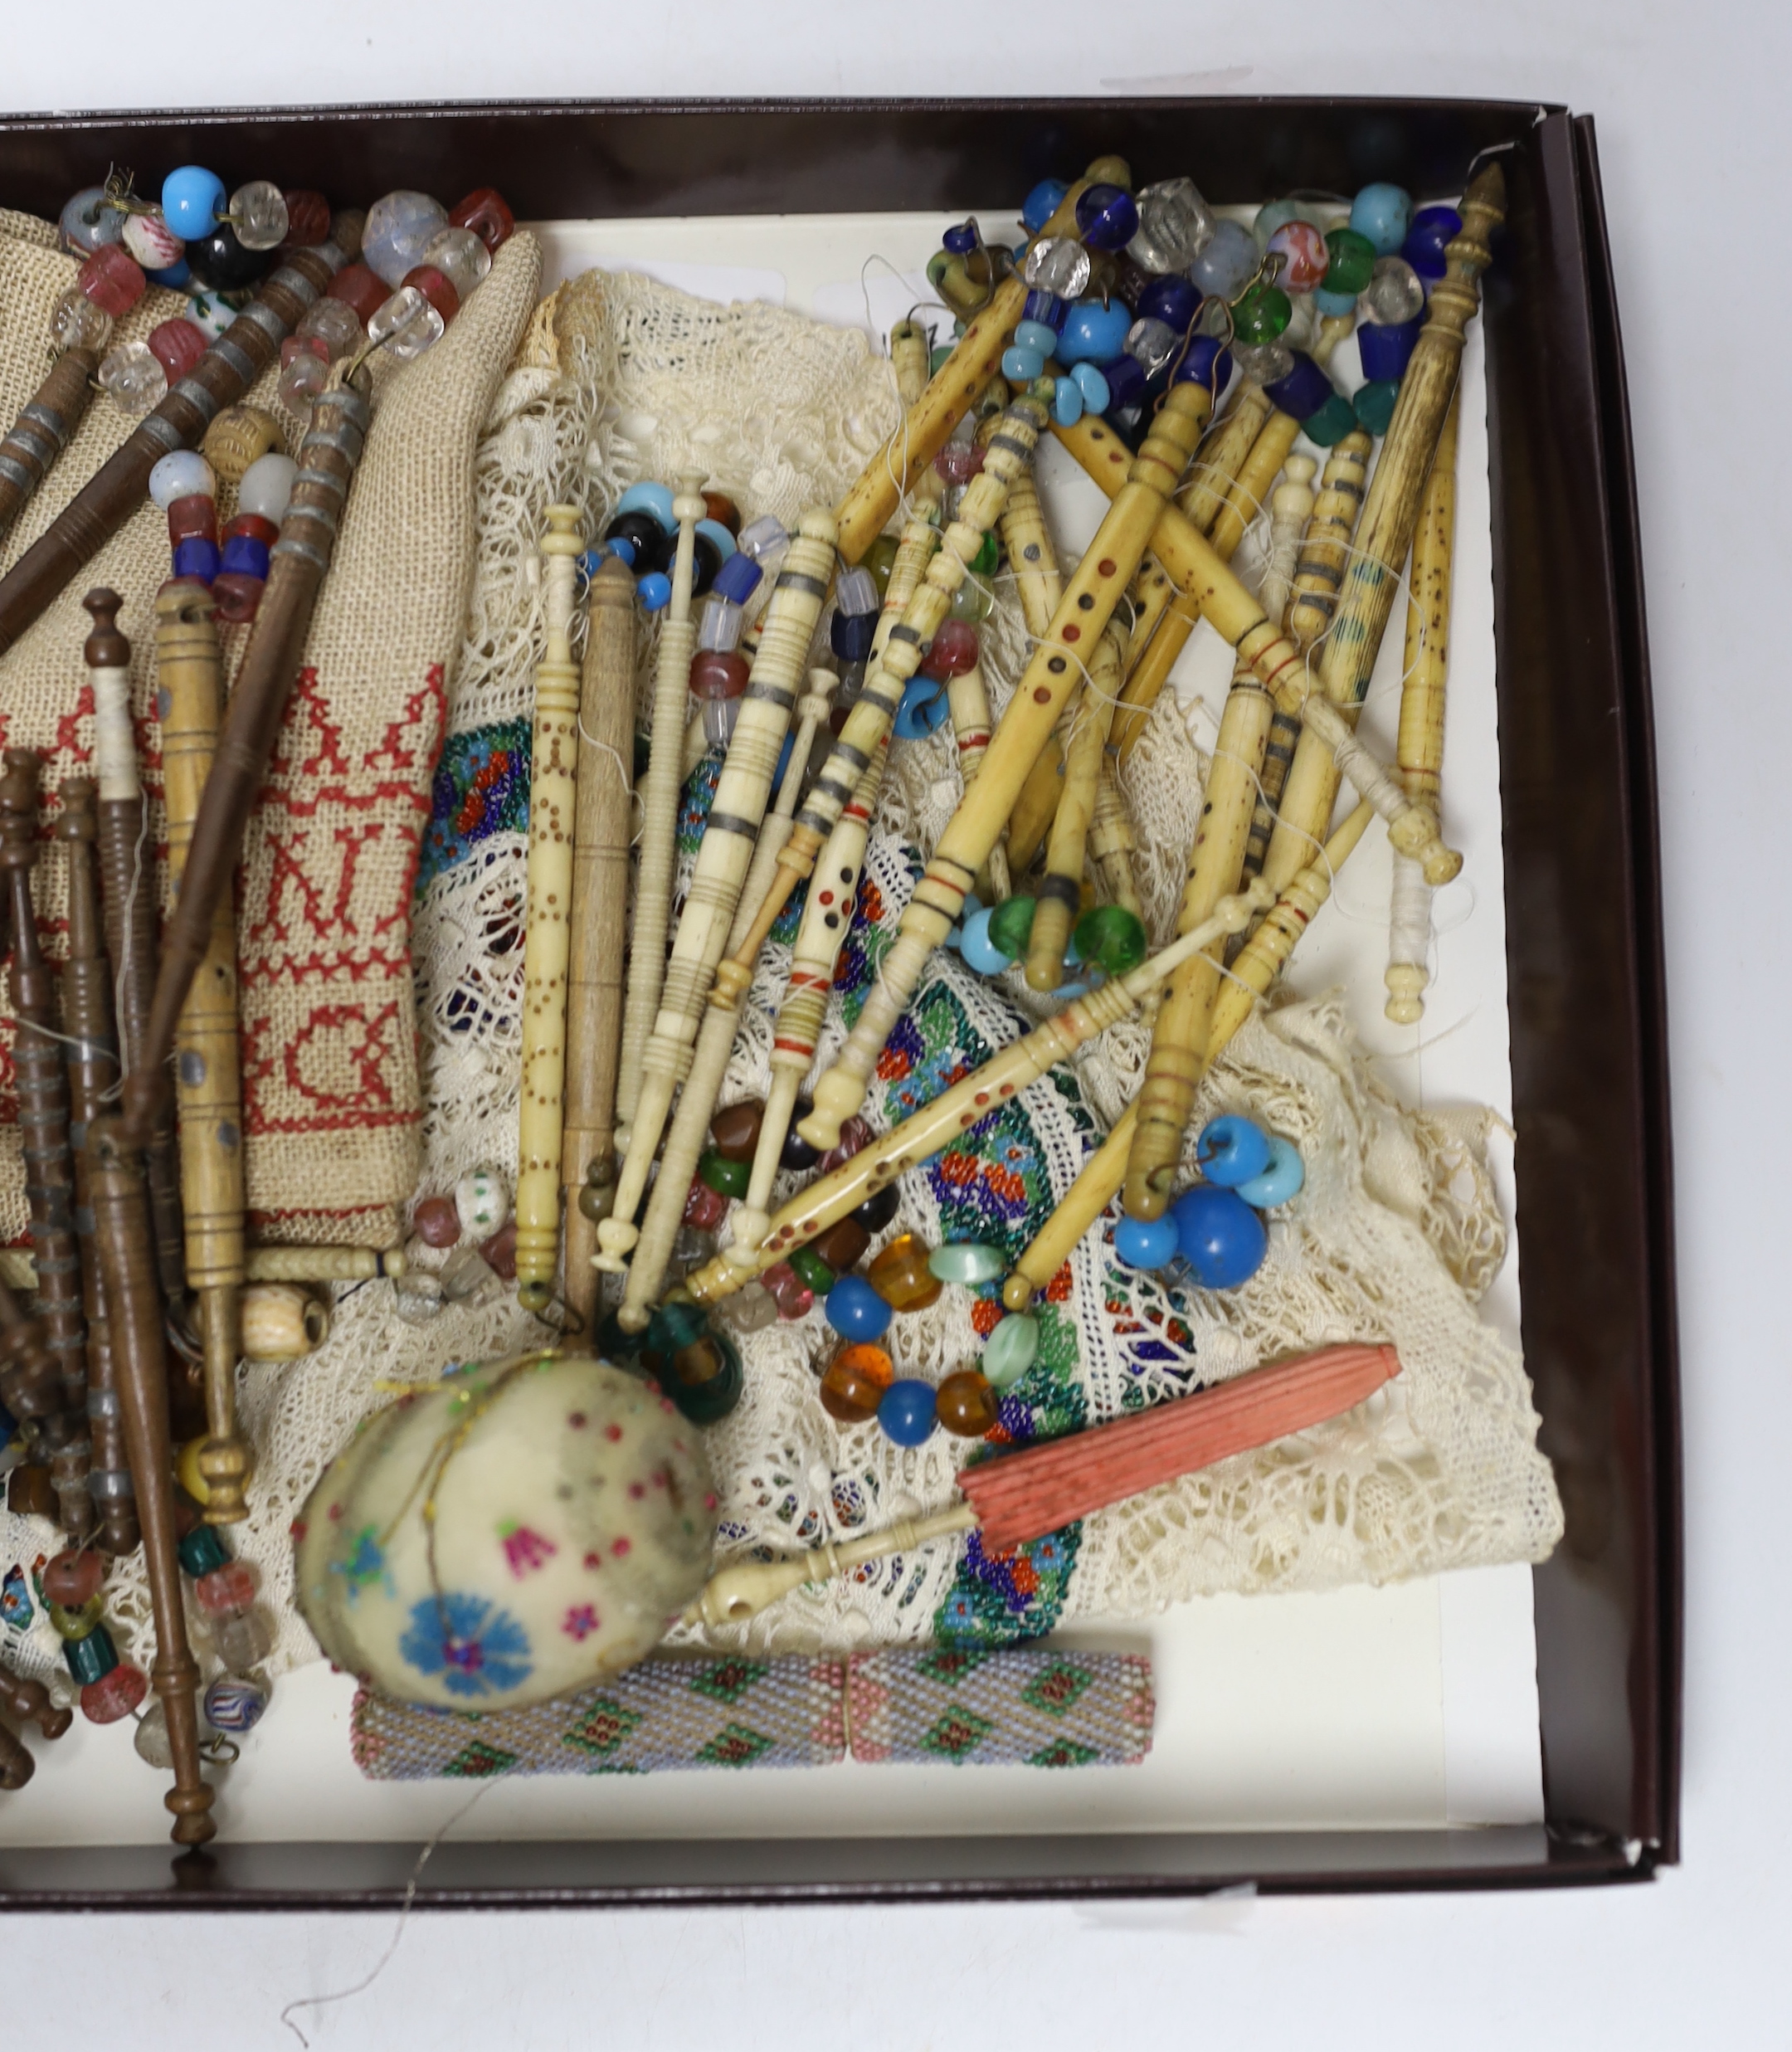 Sewing items: including a collection of bone and wooden lace maker’s bobbins, a beadworked needlecase, an egg and beadworked mats, etc.